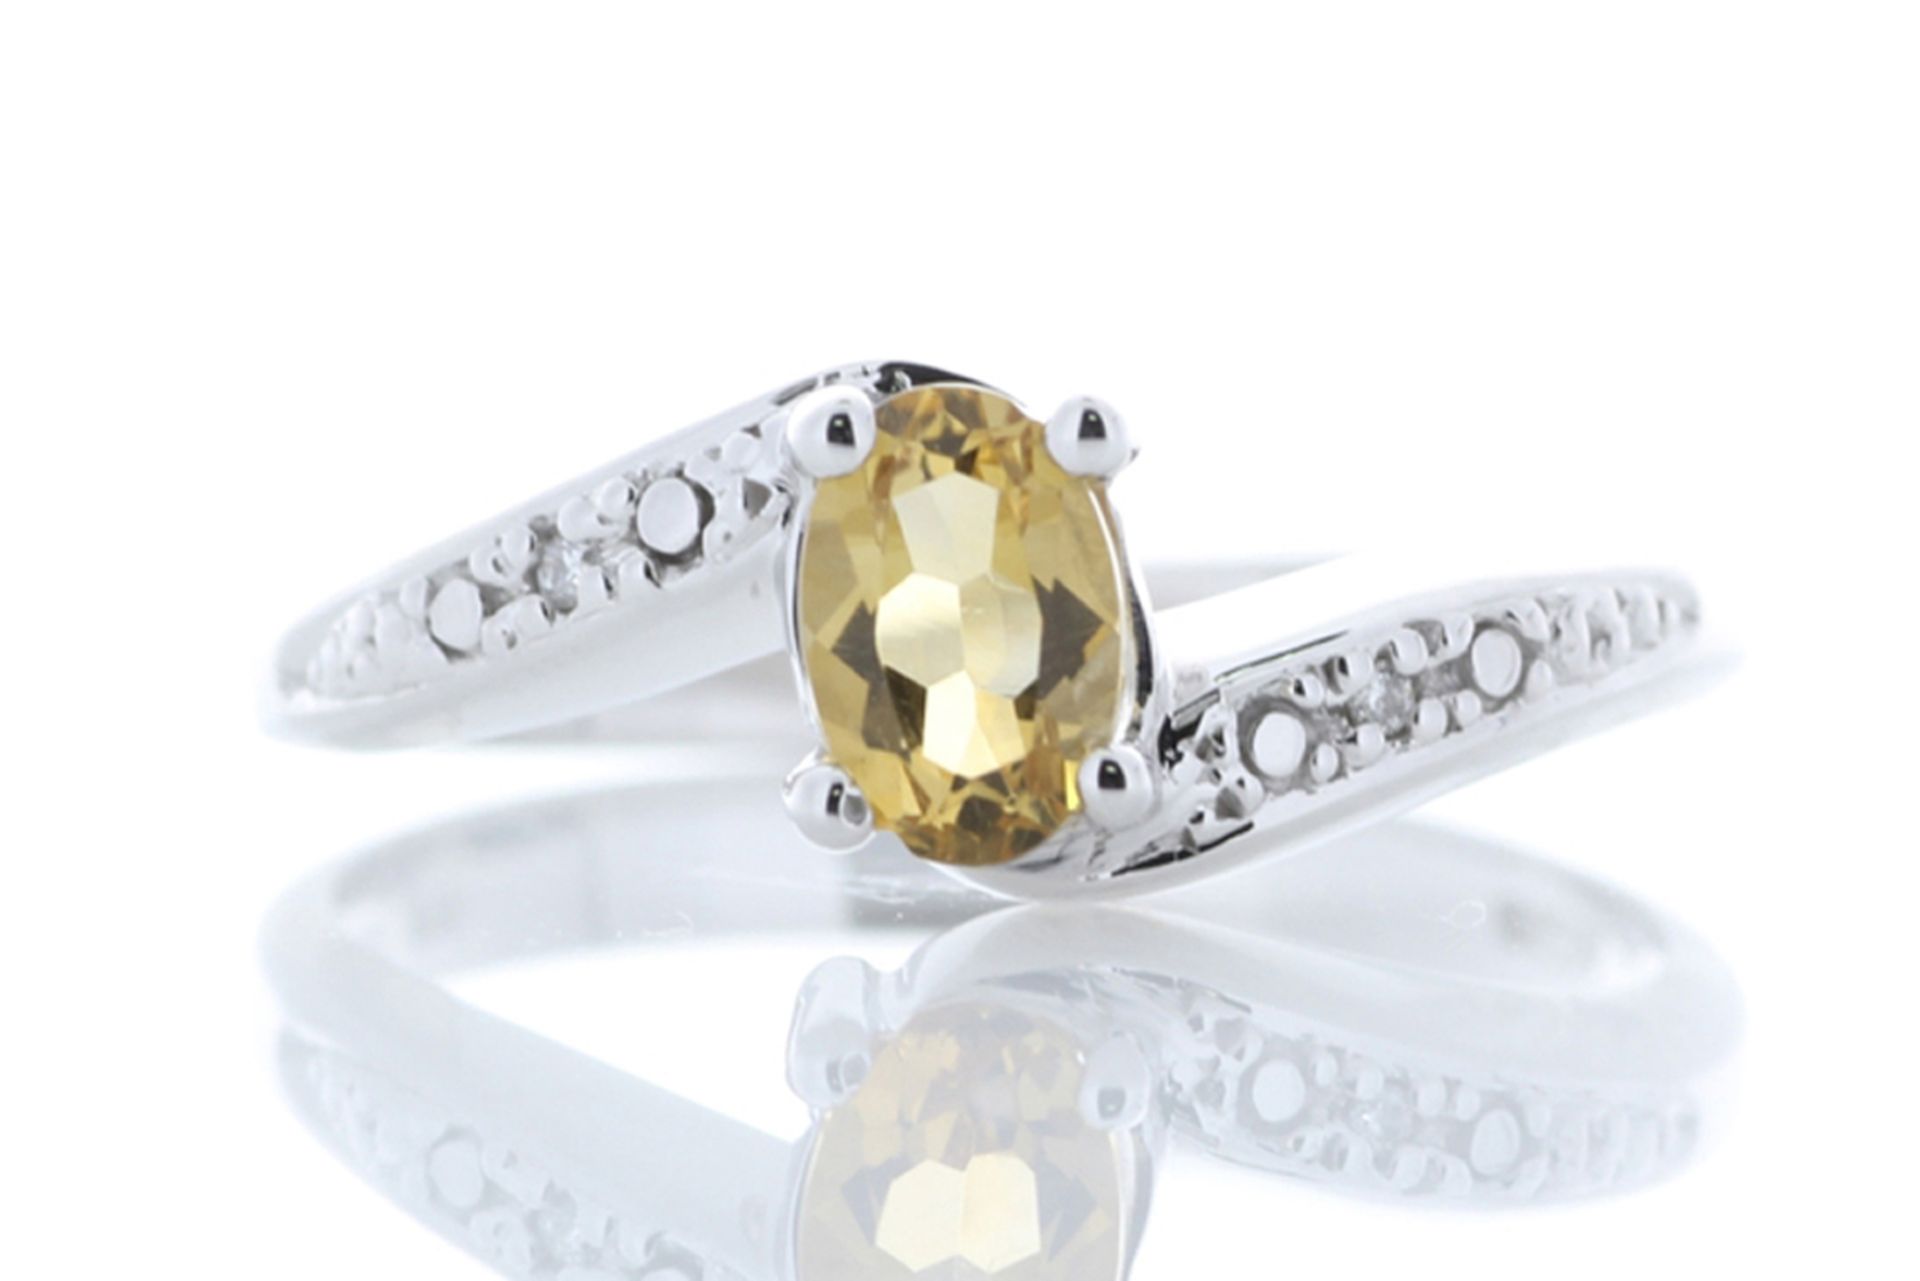 9ct White Gold Diamond And Citrine Ring 0.01 Carats - Valued by GIE £1,295.00 - A beautiful oval